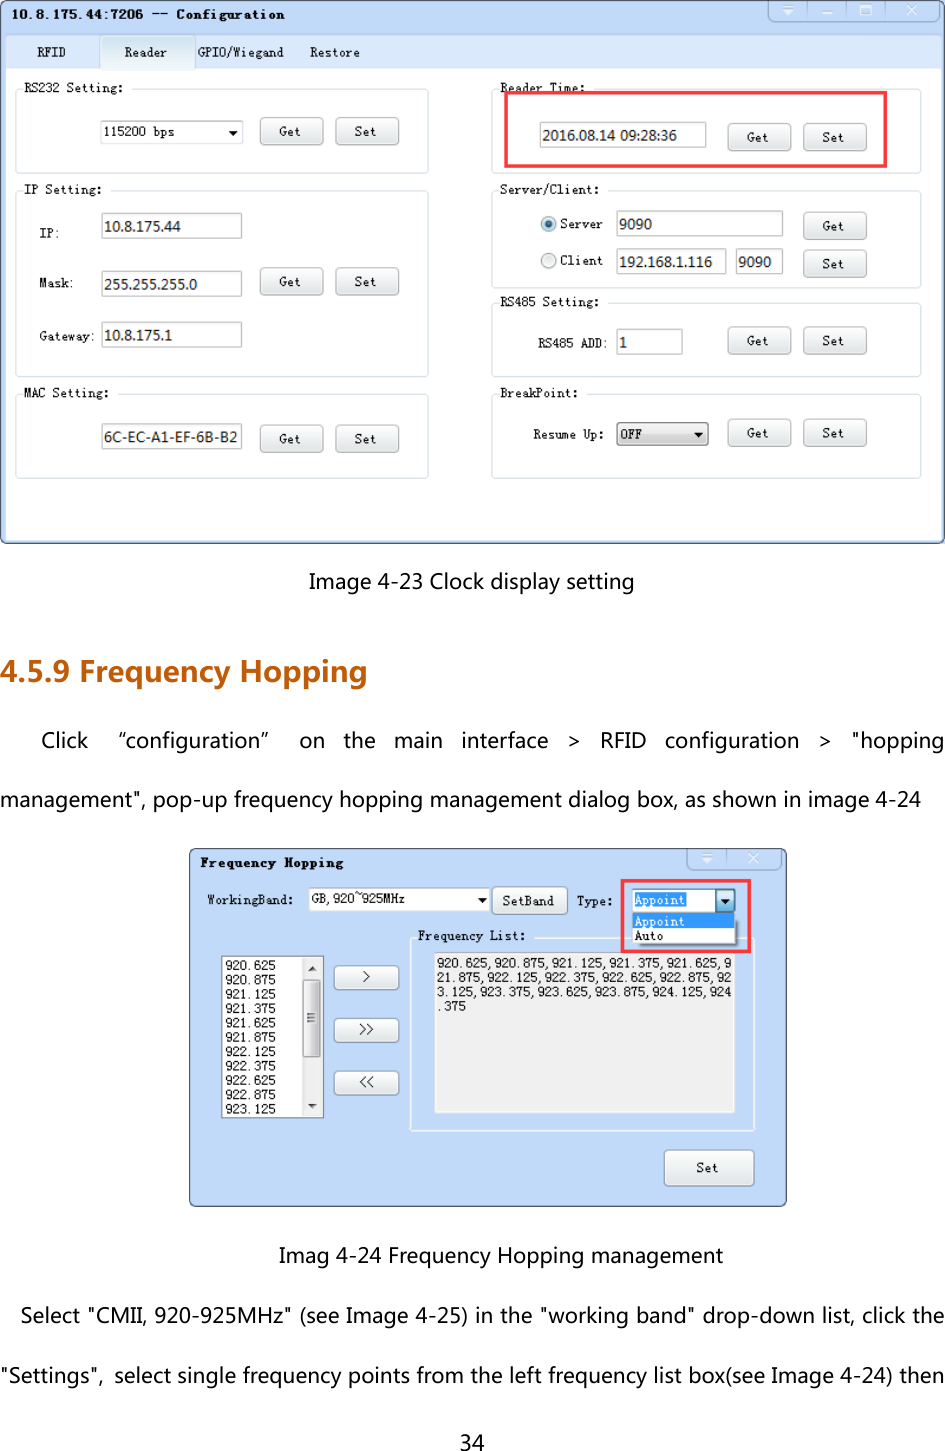  34   Image 4-23 Clock display setting 4.5.9 Frequency Hopping Click “configuration” on the main interface &gt; RFID configuration  &gt;  &quot;hopping management&quot;, pop-up frequency hopping management dialog box, as shown in image 4-24  Imag 4-24 Frequency Hopping management Select &quot;CMII, 920-925MHz&quot; (see Image 4-25) in the &quot;working band&quot; drop-down list, click the &quot;Settings&quot;, select single frequency points from the left frequency list box(see Image 4-24) then 